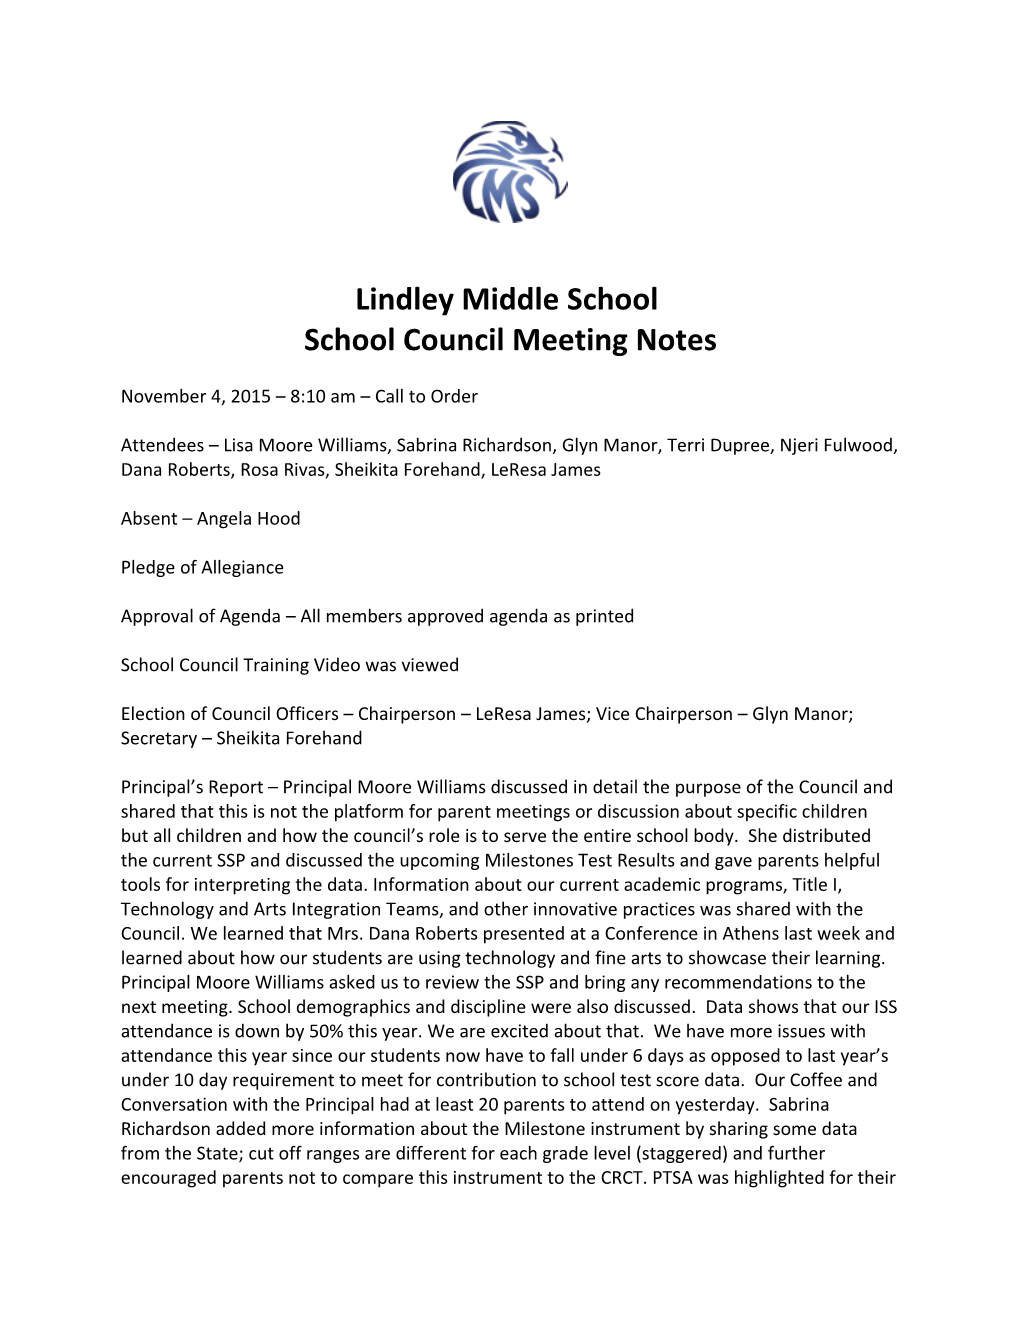 School Council Meeting Notes